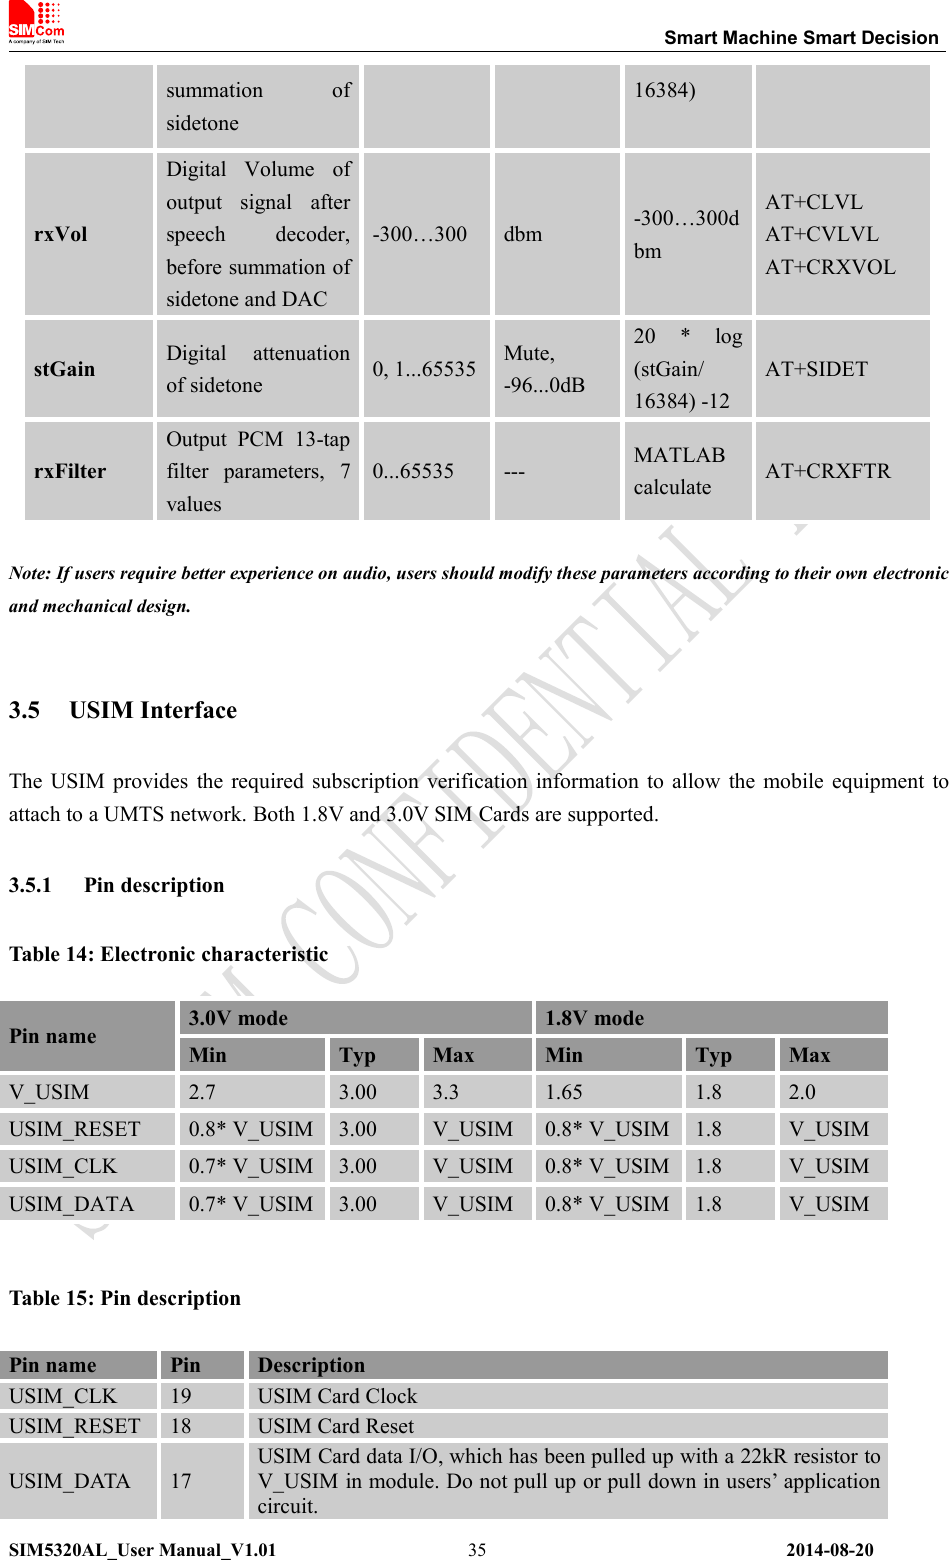 Smart Machine Smart DecisionSIM5320AL_User Manual_V1.01 2014-08-2035summation ofsidetone16384)rxVolDigital Volume ofoutput signal afterspeech decoder,before summation ofsidetone and DAC-300…300 dbm -300…300dbmAT+CLVLAT+CVLVLAT+CRXVOLstGain Digital attenuationof sidetone 0, 1...65535 Mute,-96...0dB20 * log(stGain/16384) -12AT+SIDETrxFilterOutput PCM 13-tapfilter parameters, 7values0...65535 --- MATLABcalculate AT+CRXFTRNote: If users require better experience on audio, users should modify these parameters according to their own electronicand mechanical design.3.5 USIM InterfaceThe USIM provides the required subscription verification information to allow the mobile equipment toattach to a UMTS network. Both 1.8V and 3.0V SIM Cards are supported.3.5.1 Pin descriptionTable 14: Electronic characteristicTable 15: Pin descriptionPin name 3.0V mode 1.8V modeMin Typ Max Min Typ MaxV_USIM 2.7 3.00 3.3 1.65 1.8 2.0USIM_RESET 0.8* V_USIM 3.00 V_USIM 0.8* V_USIM 1.8 V_USIMUSIM_CLK 0.7* V_USIM 3.00 V_USIM 0.8* V_USIM 1.8 V_USIMUSIM_DATA 0.7* V_USIM 3.00 V_USIM 0.8* V_USIM 1.8 V_USIMPin name Pin DescriptionUSIM_CLK 19 USIM Card ClockUSIM_RESET 18 USIM Card ResetUSIM_DATA 17USIM Card data I/O, which has been pulled up with a 22kR resistor toV_USIM in module. Do not pull up or pull down in users’ applicationcircuit.